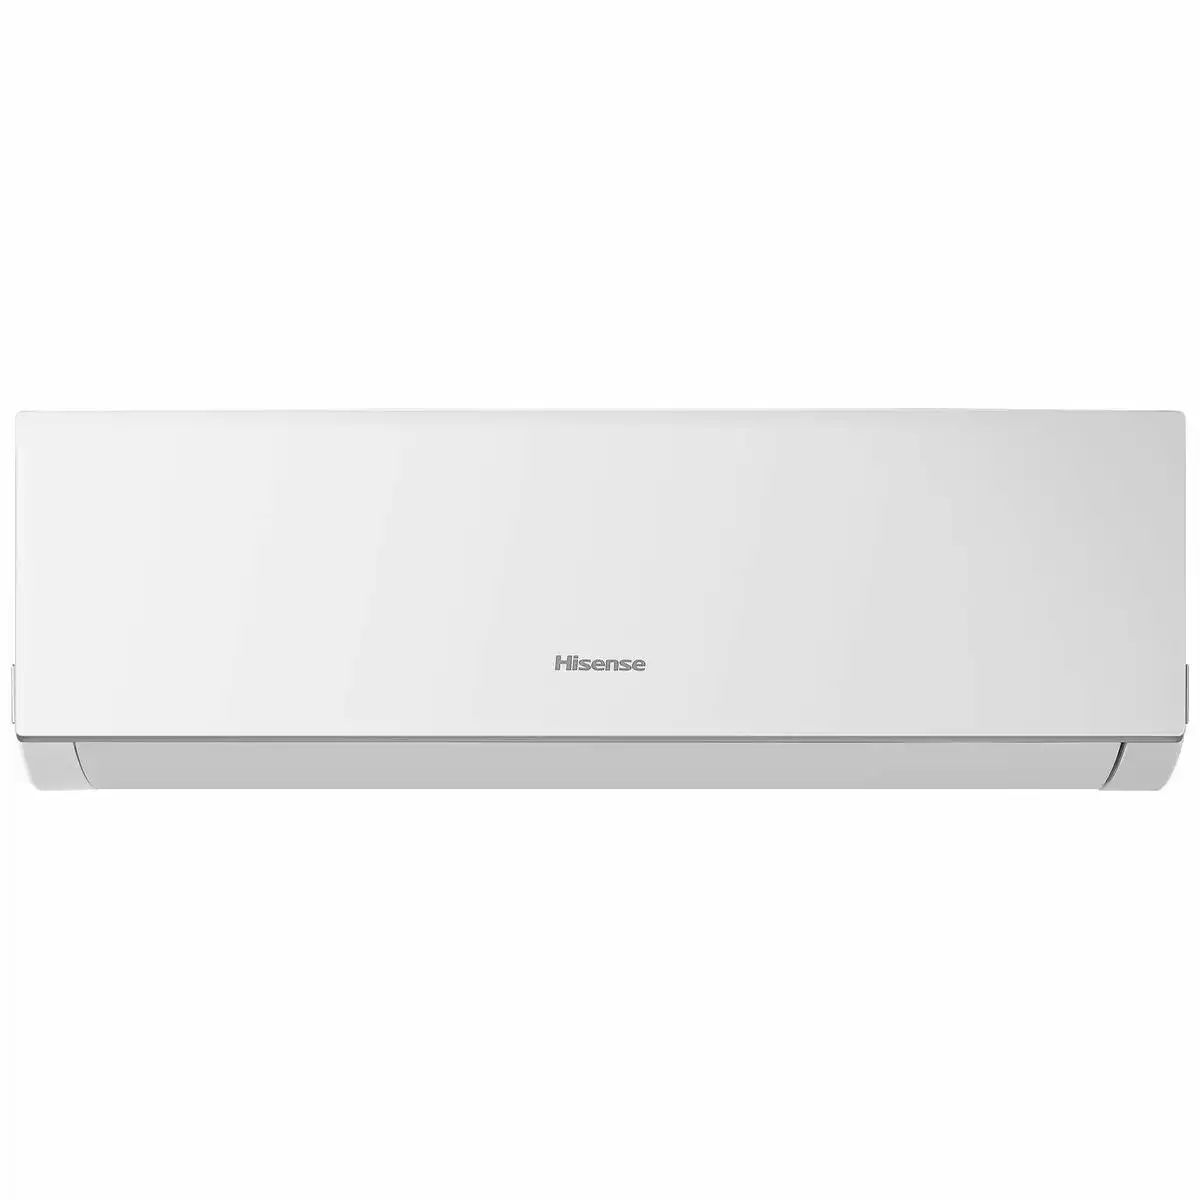 Hisense 7.1kw Reverse Cycle Air Conditioner